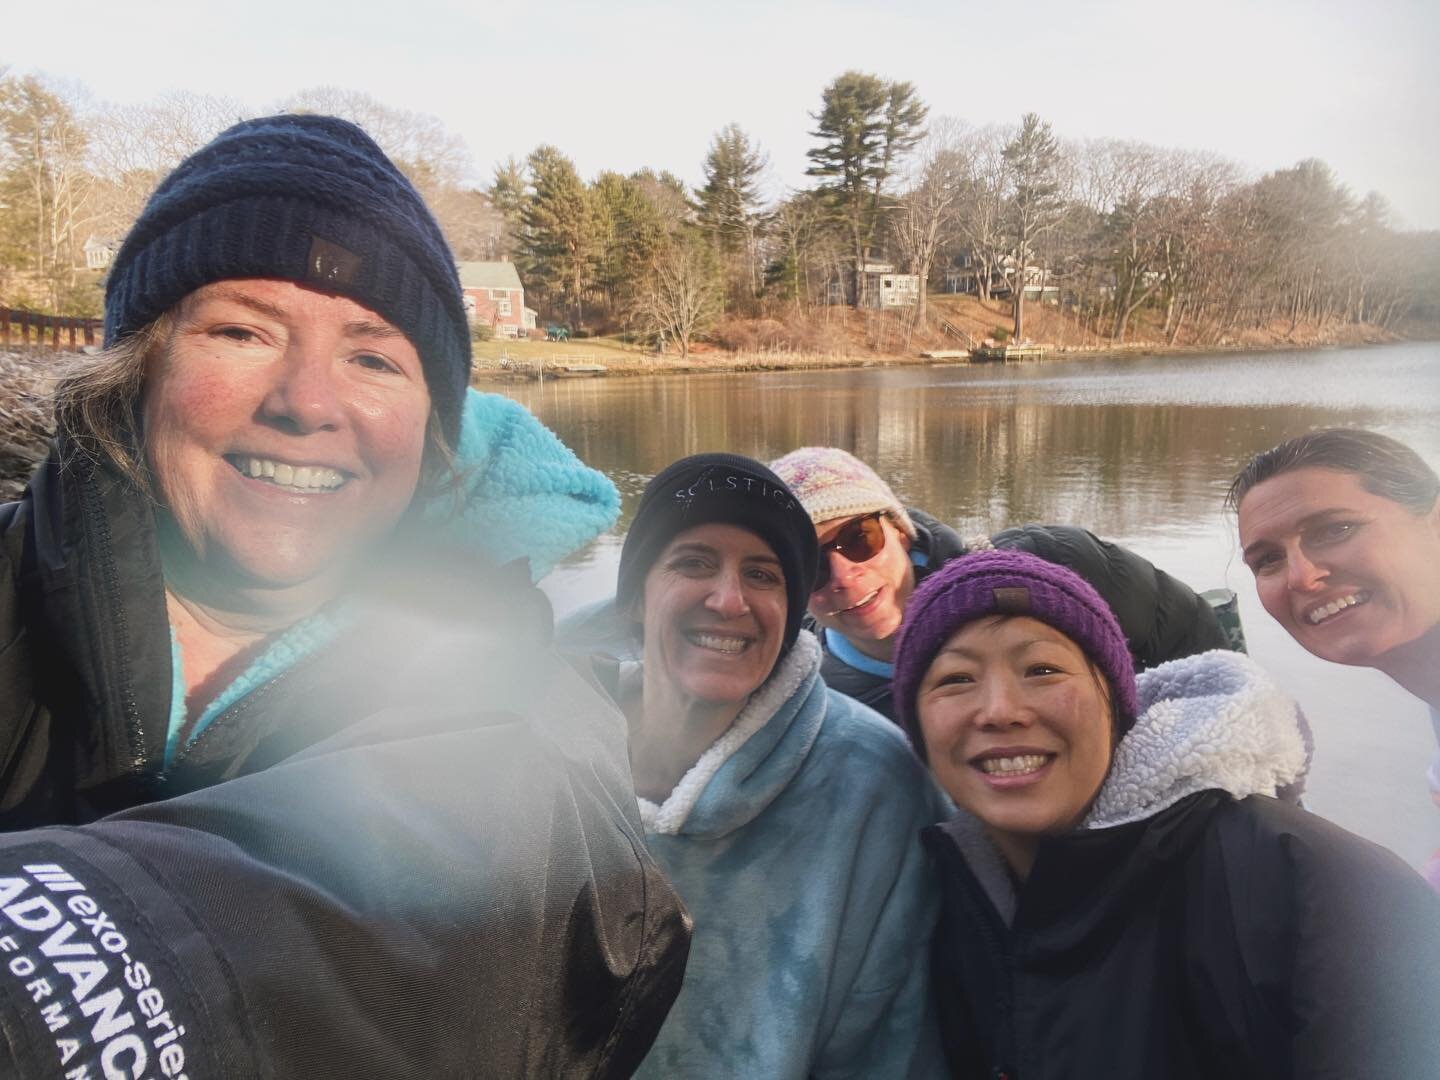 Met some new dipping friends today! Thanks for inviting me along. @bluefernforestbathing is dipping today for @finding.our.voices - thanks to @dipdowntoriseup too for making us aware of this Maine organization that is bringing voice through action to